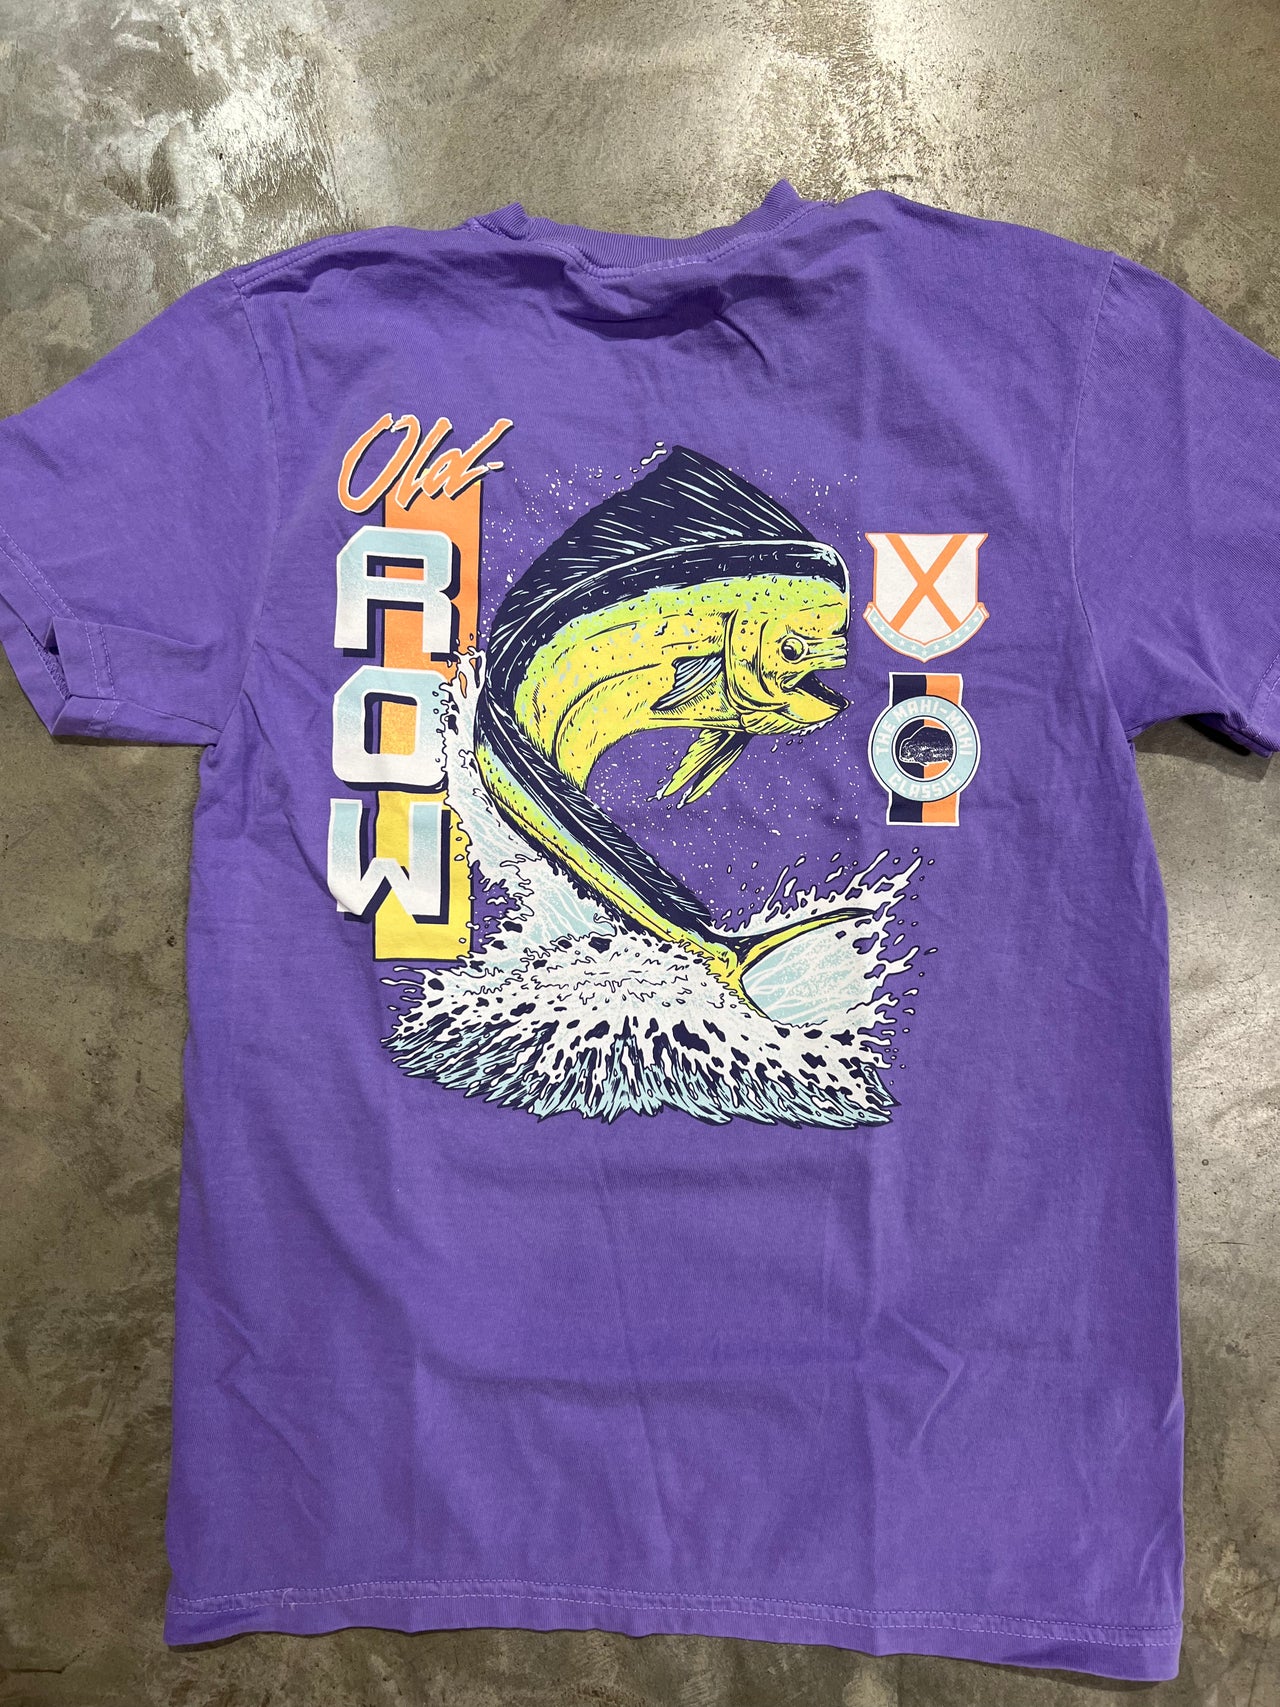 Mahi jumping out of the water on an Old Row Short Sleeve T-shirt in the color Violet.